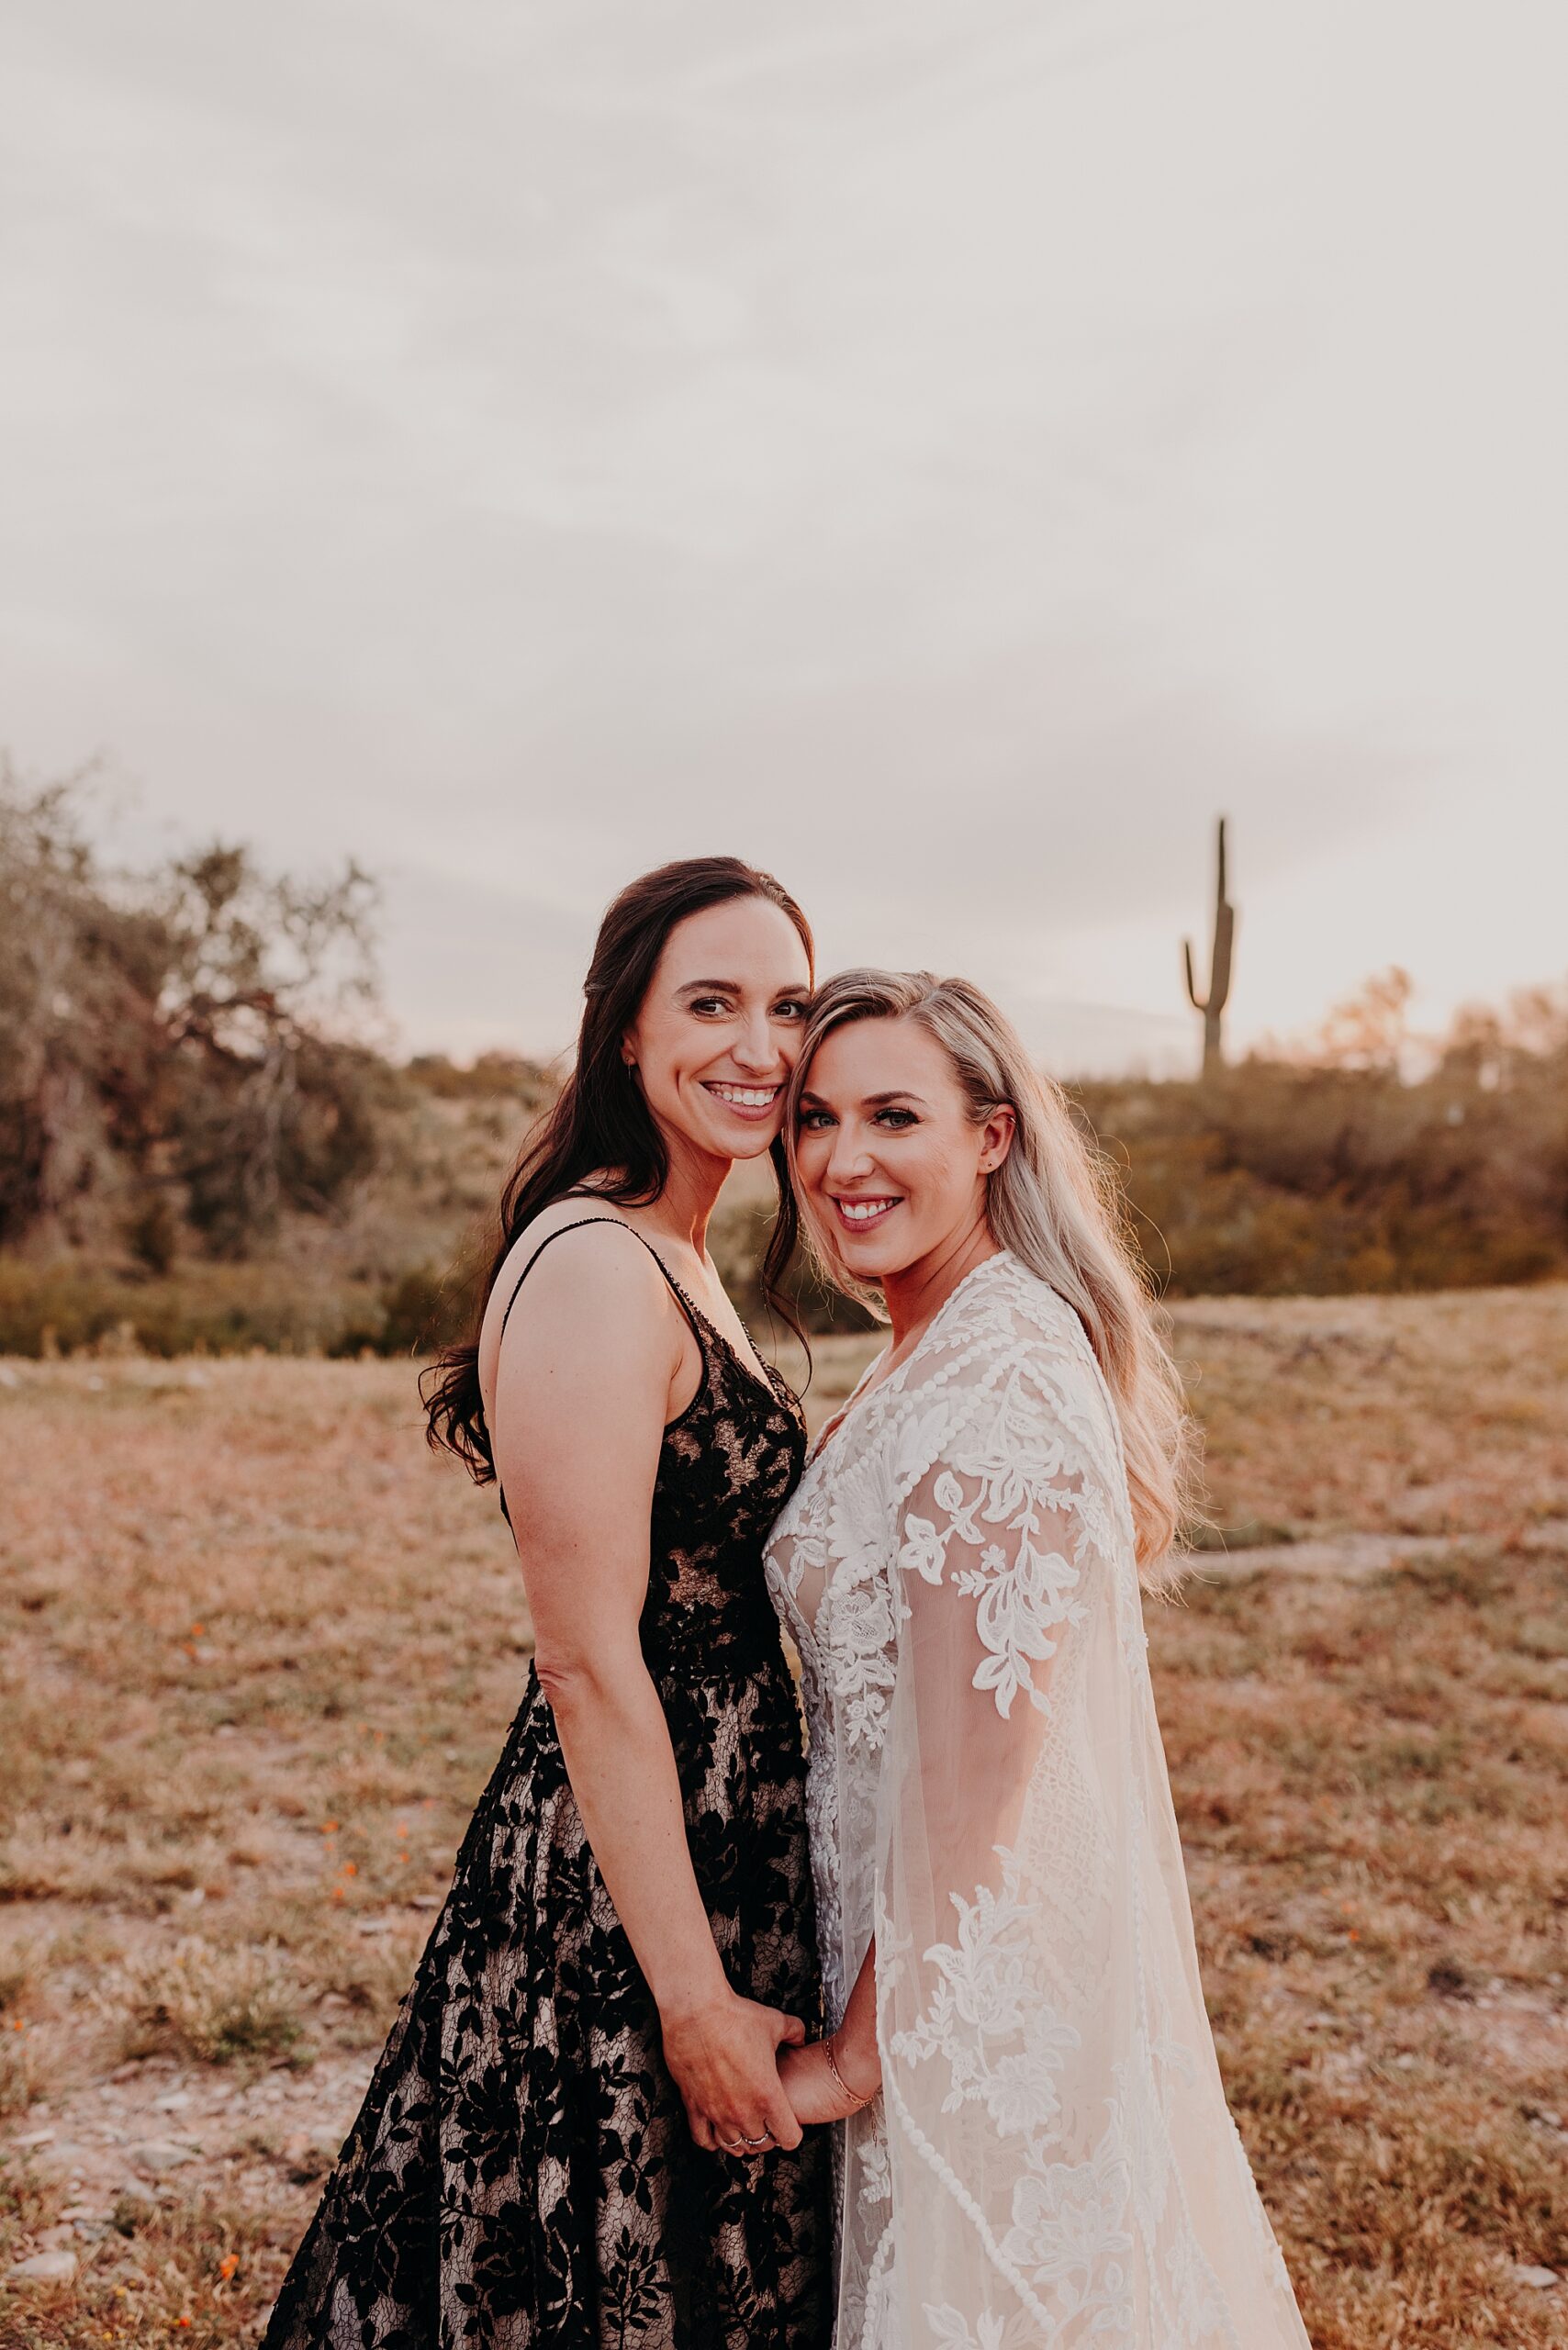 Two brides in the desert with black and white dresses